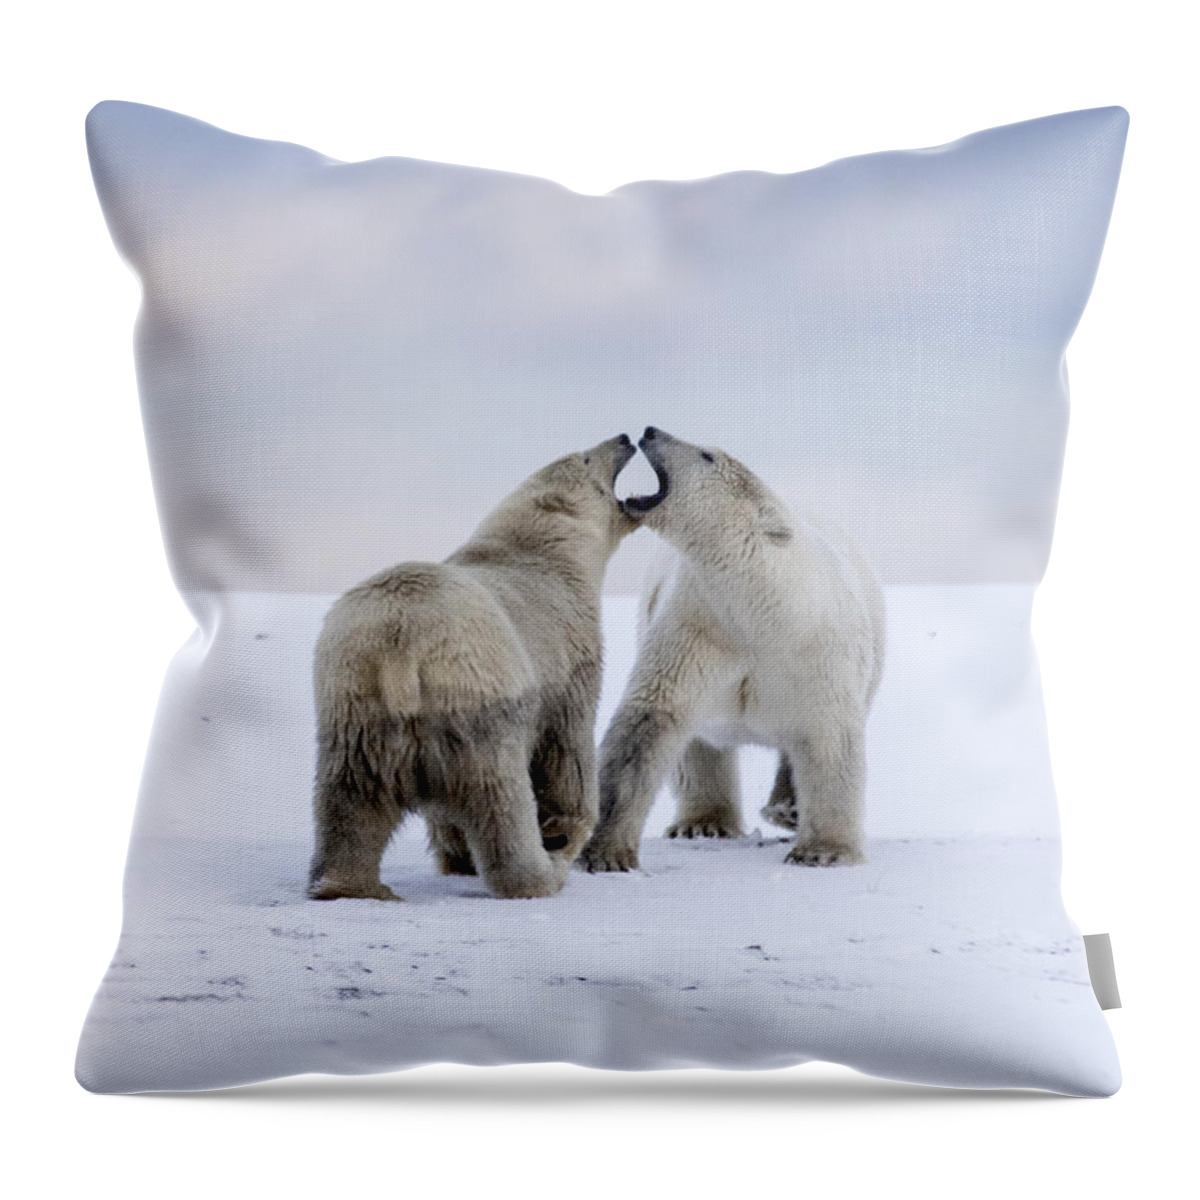 Animal Throw Pillow featuring the photograph Artic Antics by Cheryl Strahl